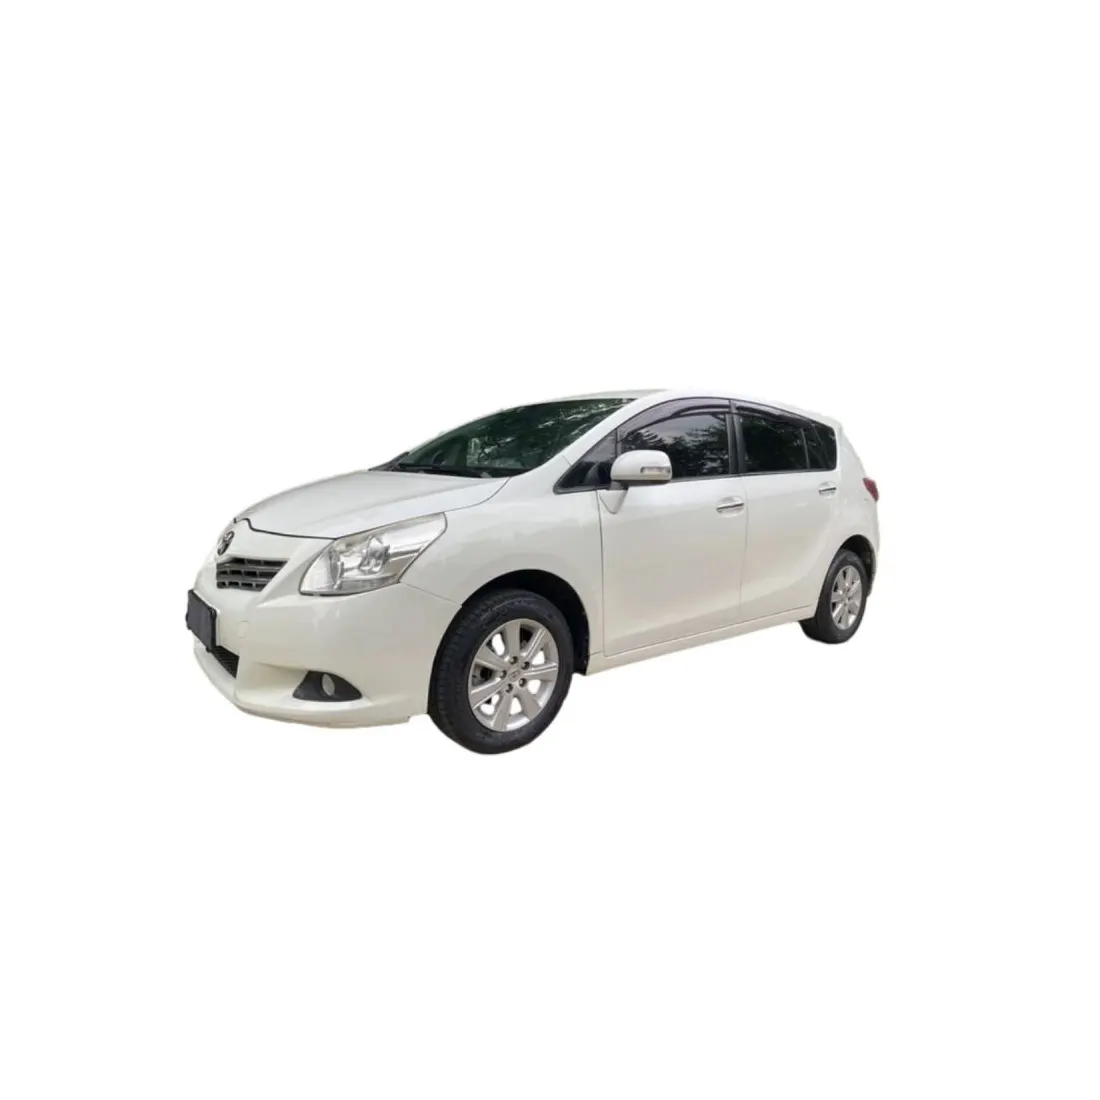 In Stock 5 days delivery best price 2011 toyota verso 180E CVT alto MPV use cars vehicles cheap second car